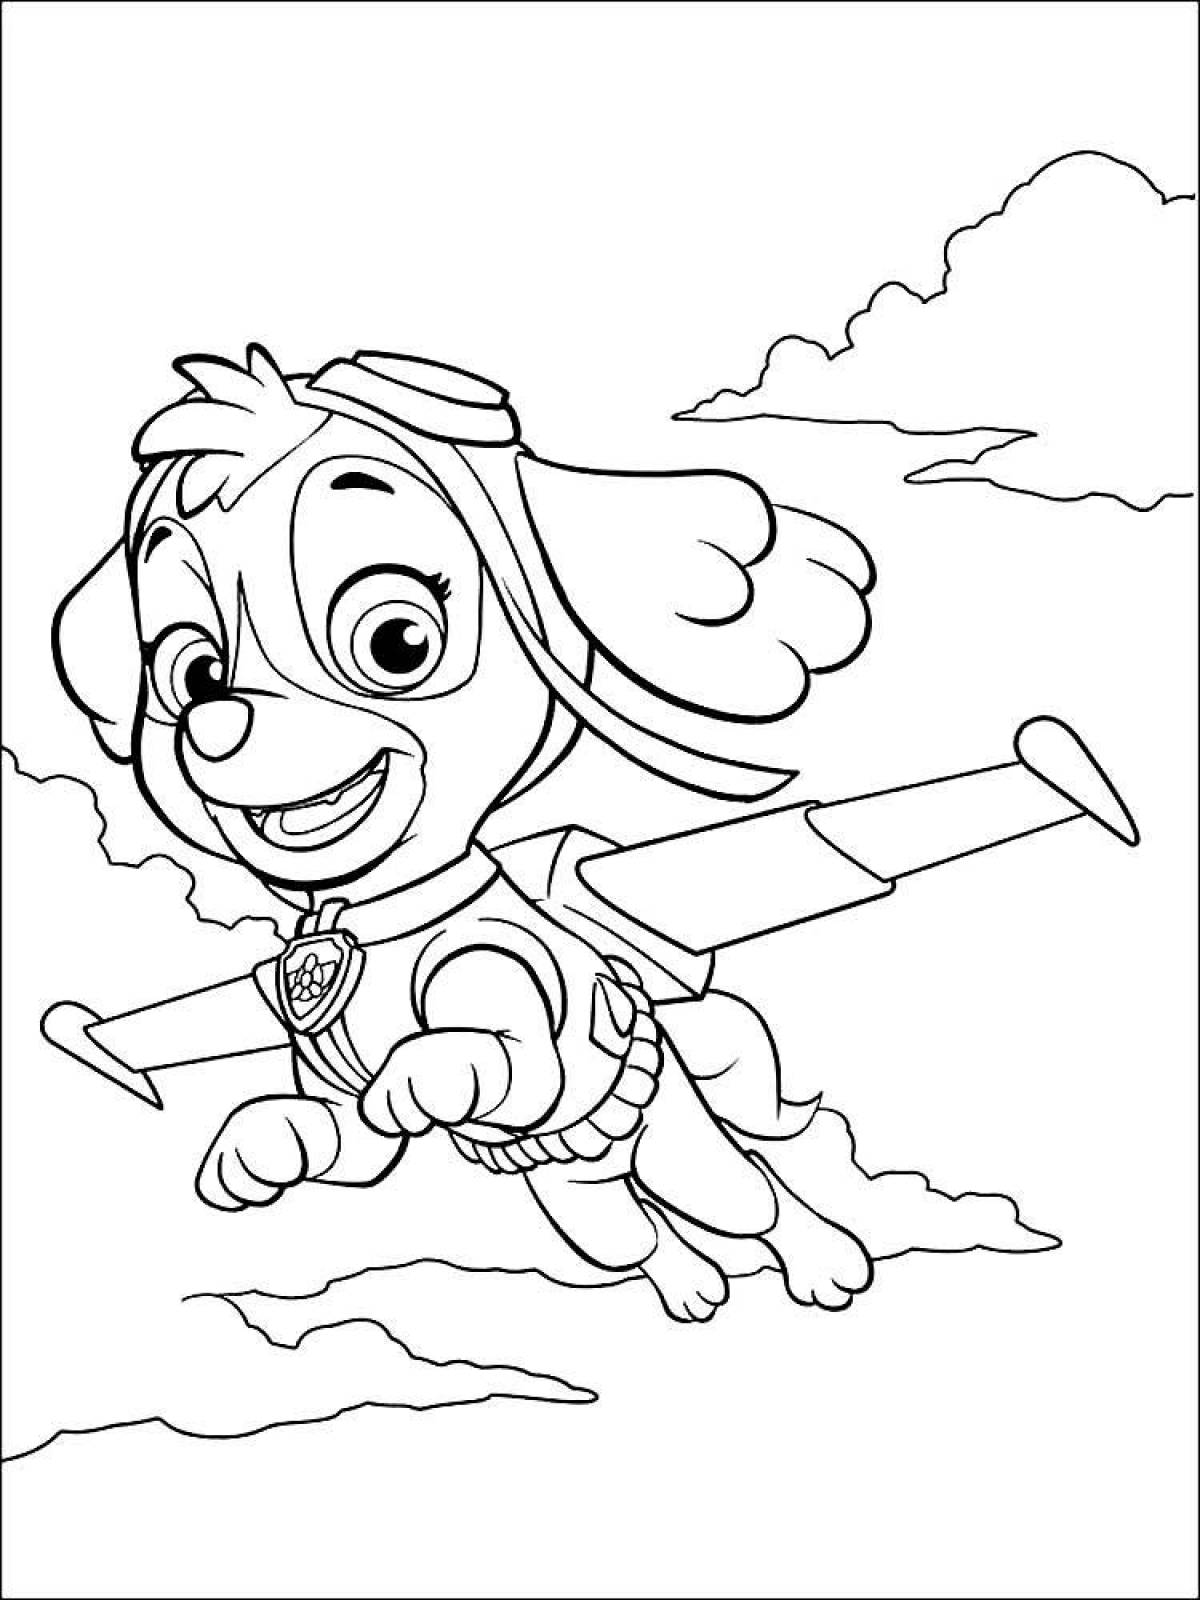 Adorable paw patrol sky coloring page